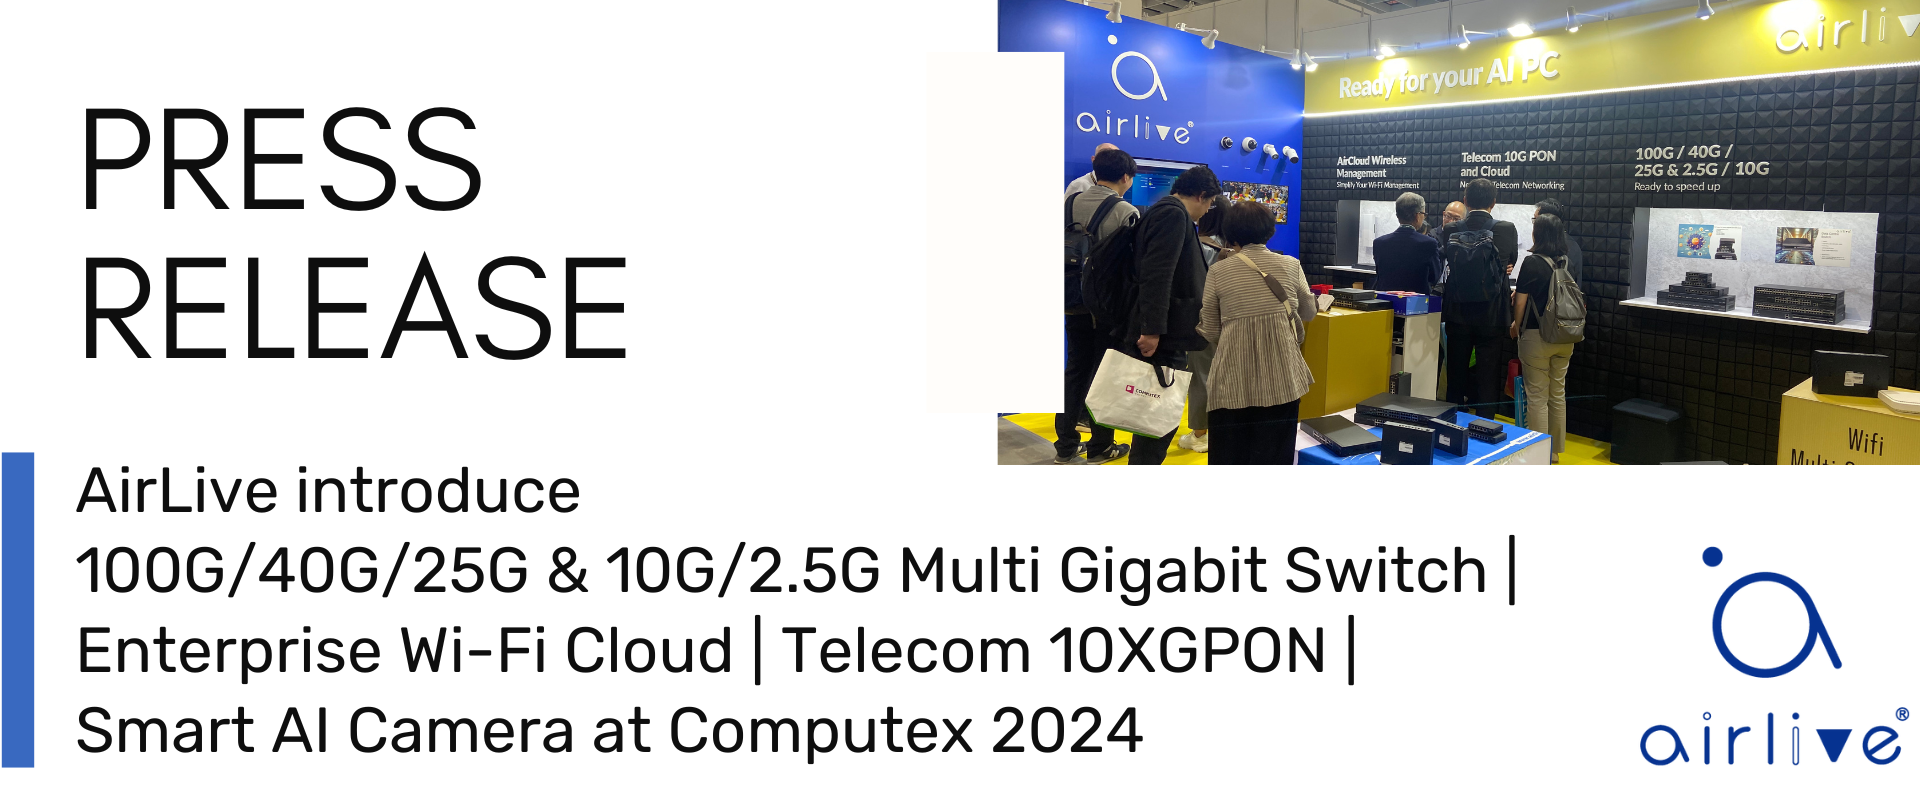 AirLive 2024 Computex PR Banner